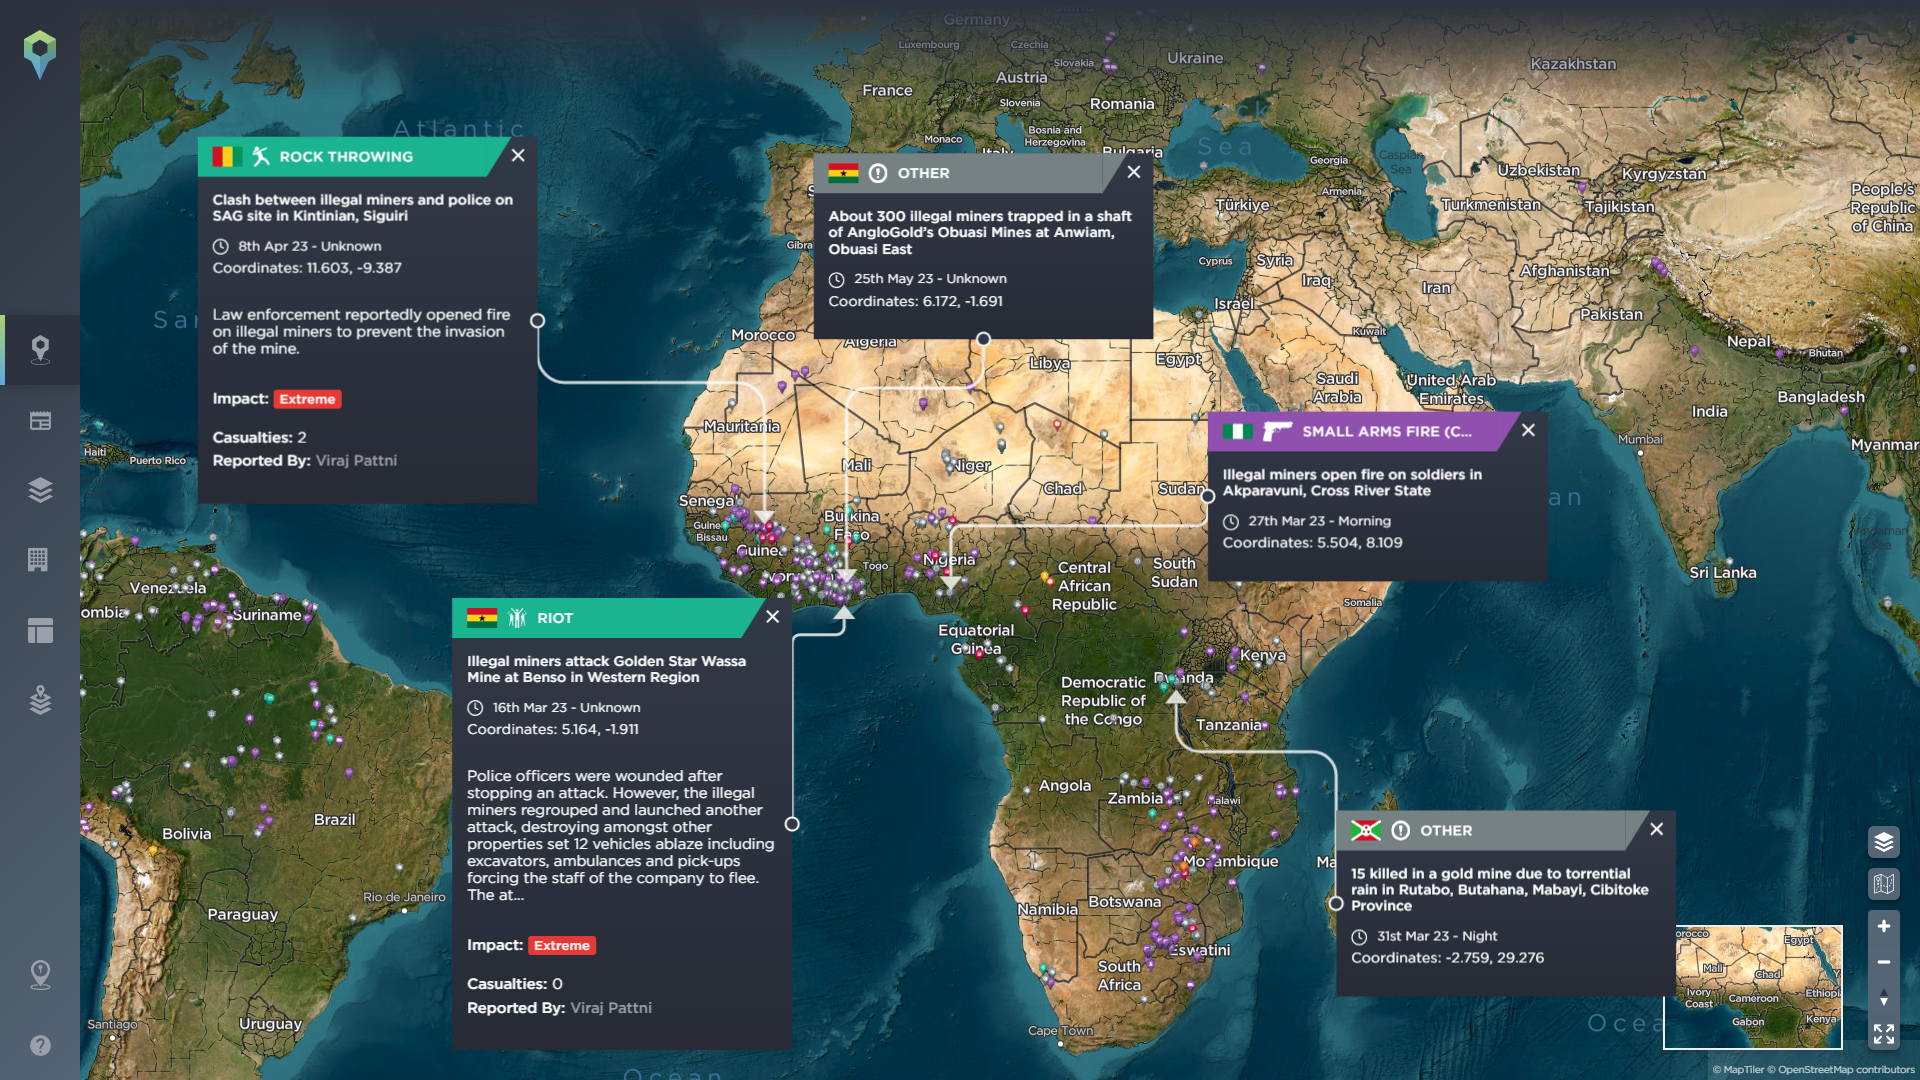 Tracking Illegal mining in Africa